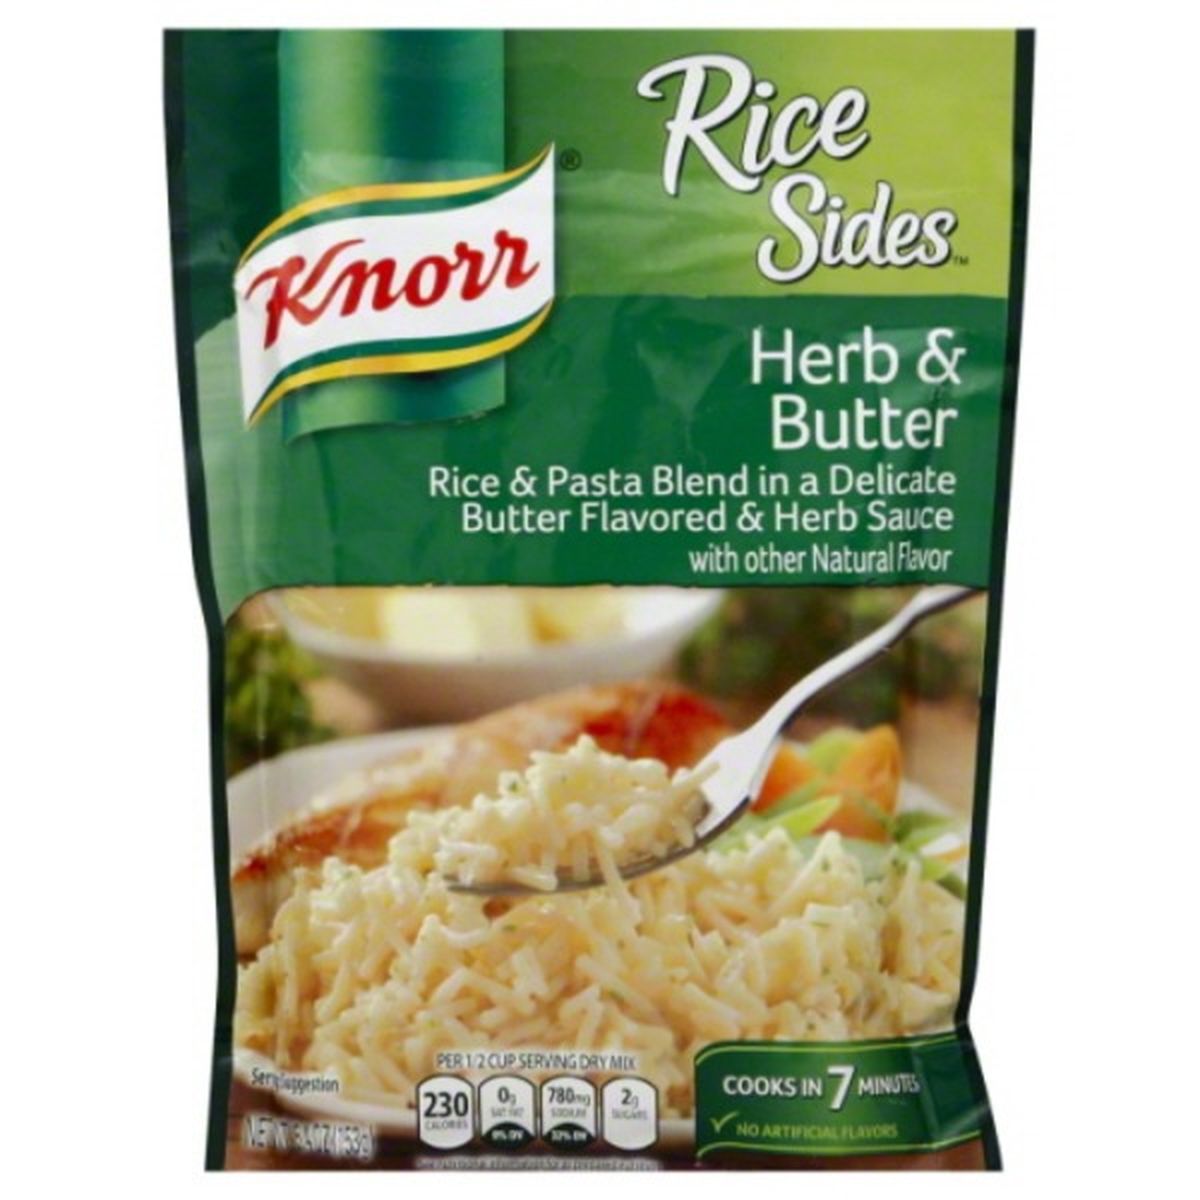 Calories in Knorr Rice Sides Herb & Butter